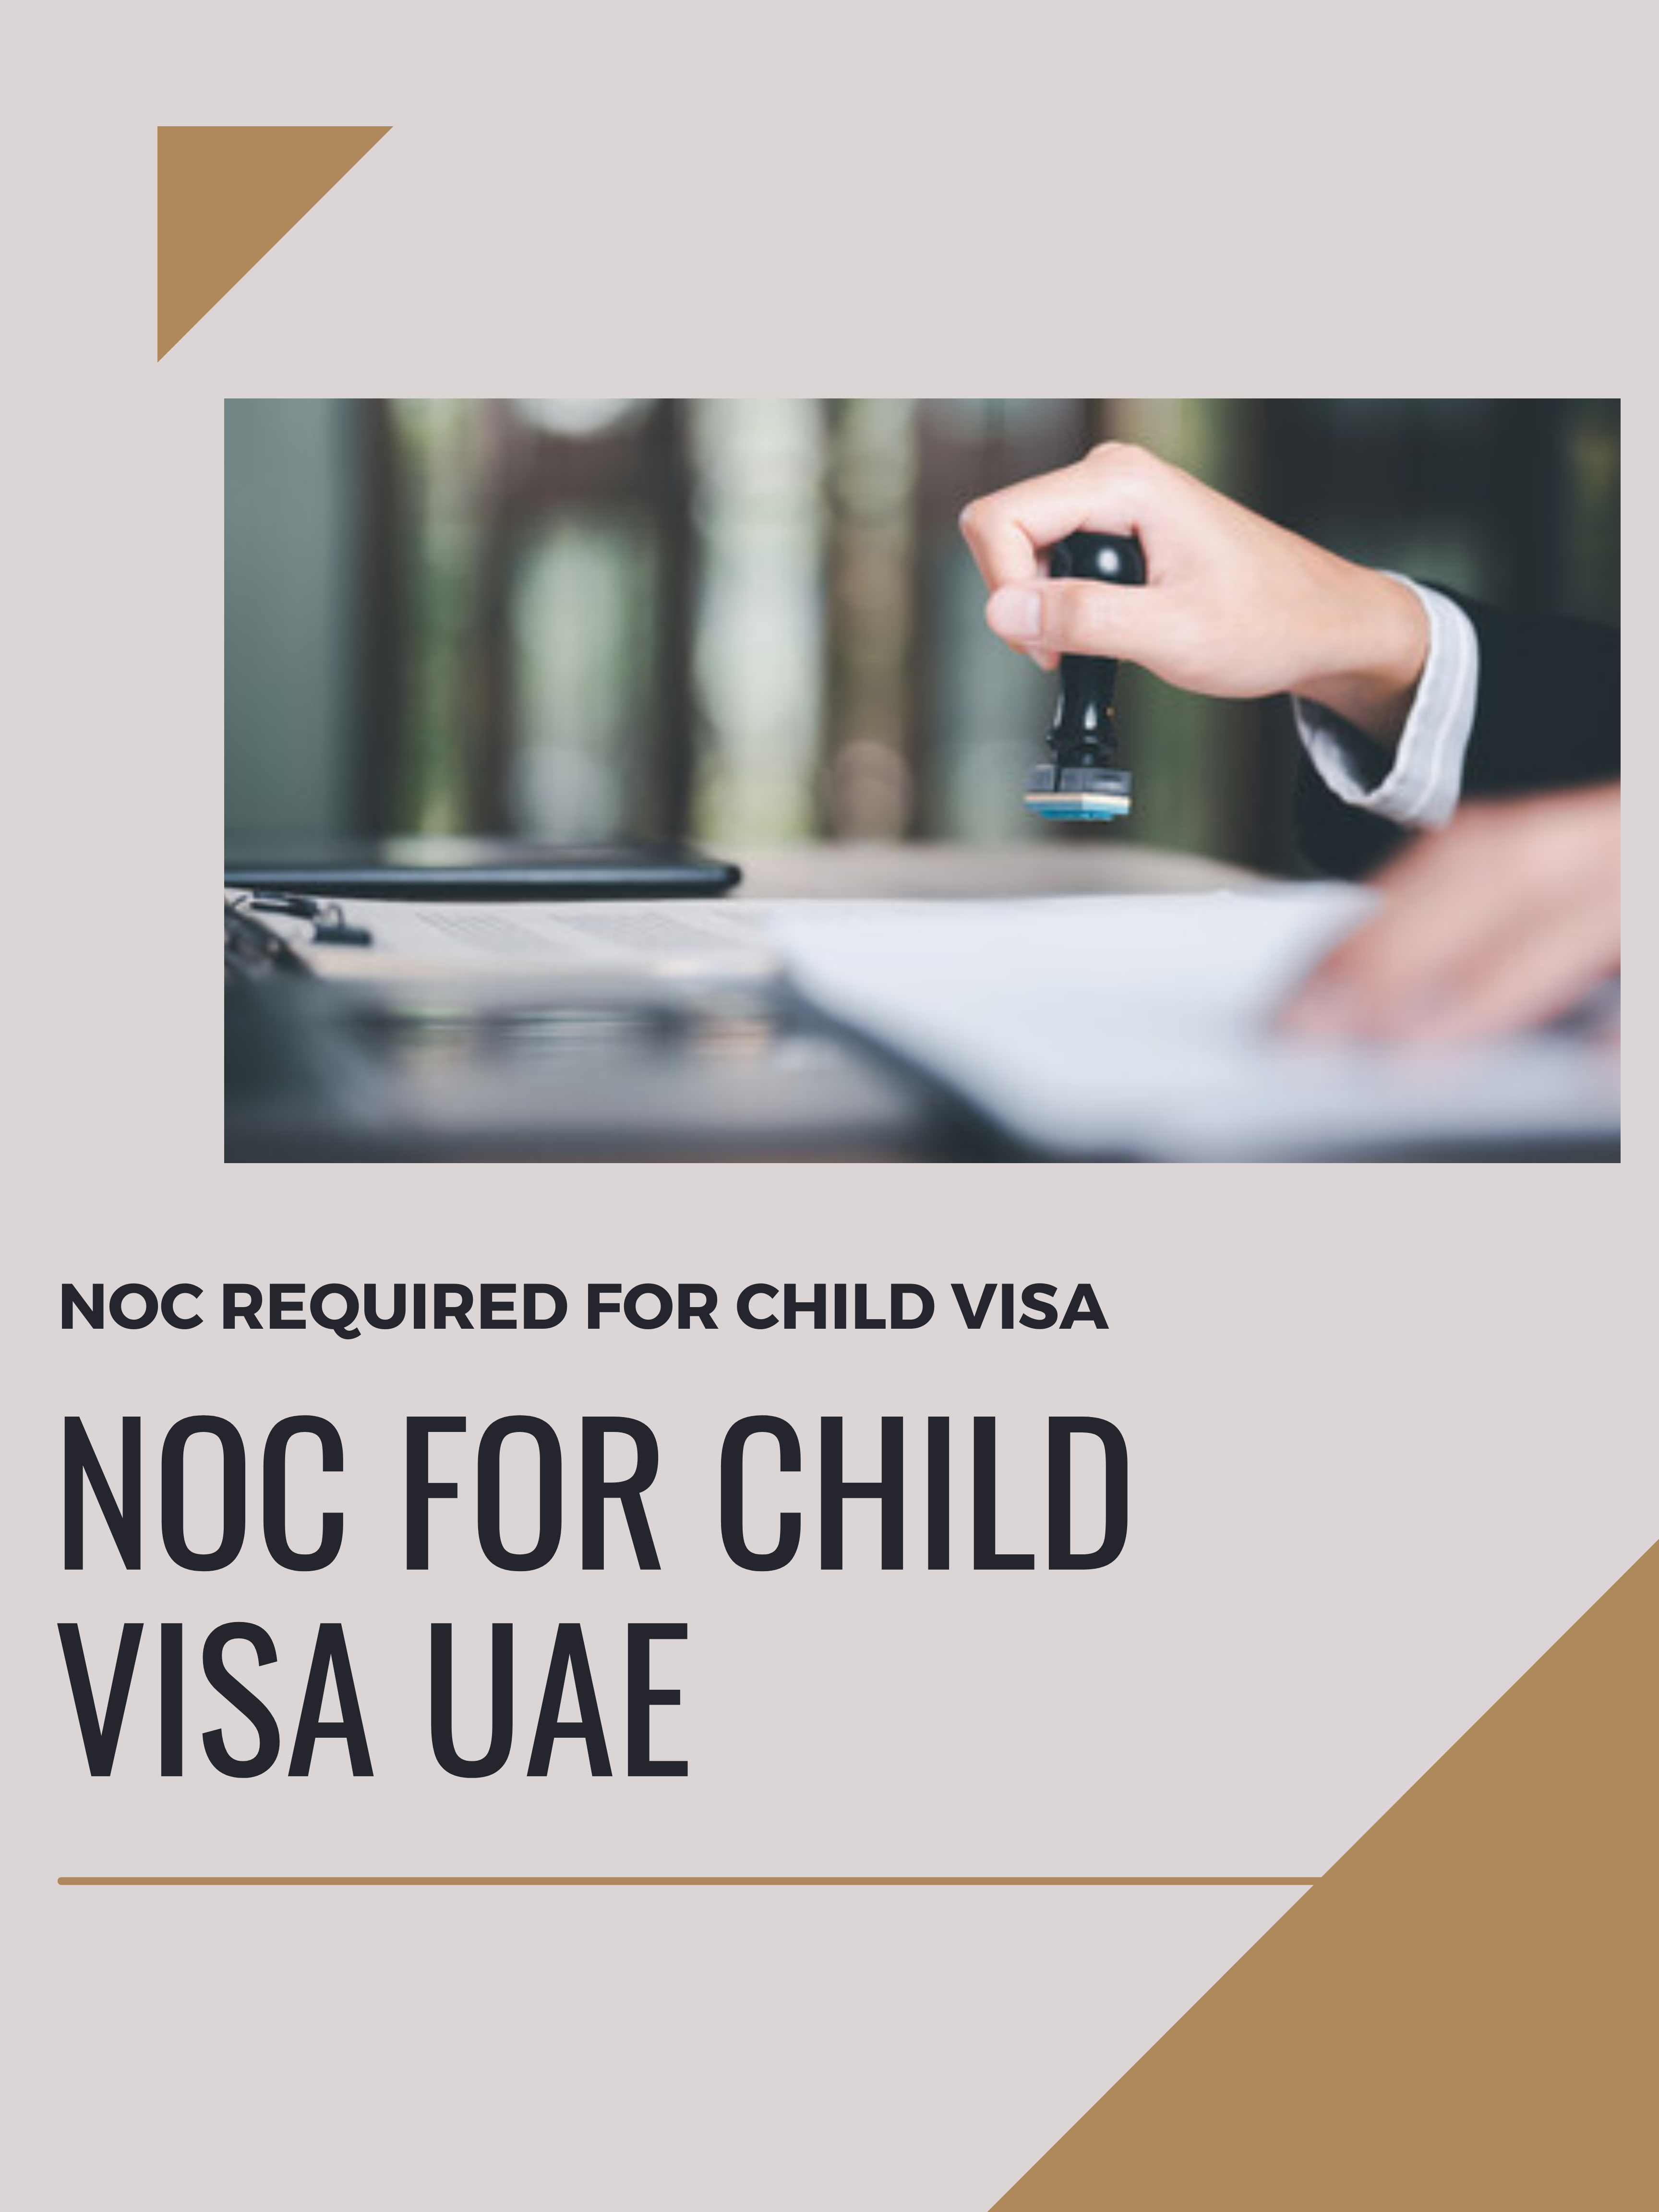 No objection certificate for child visa UAE